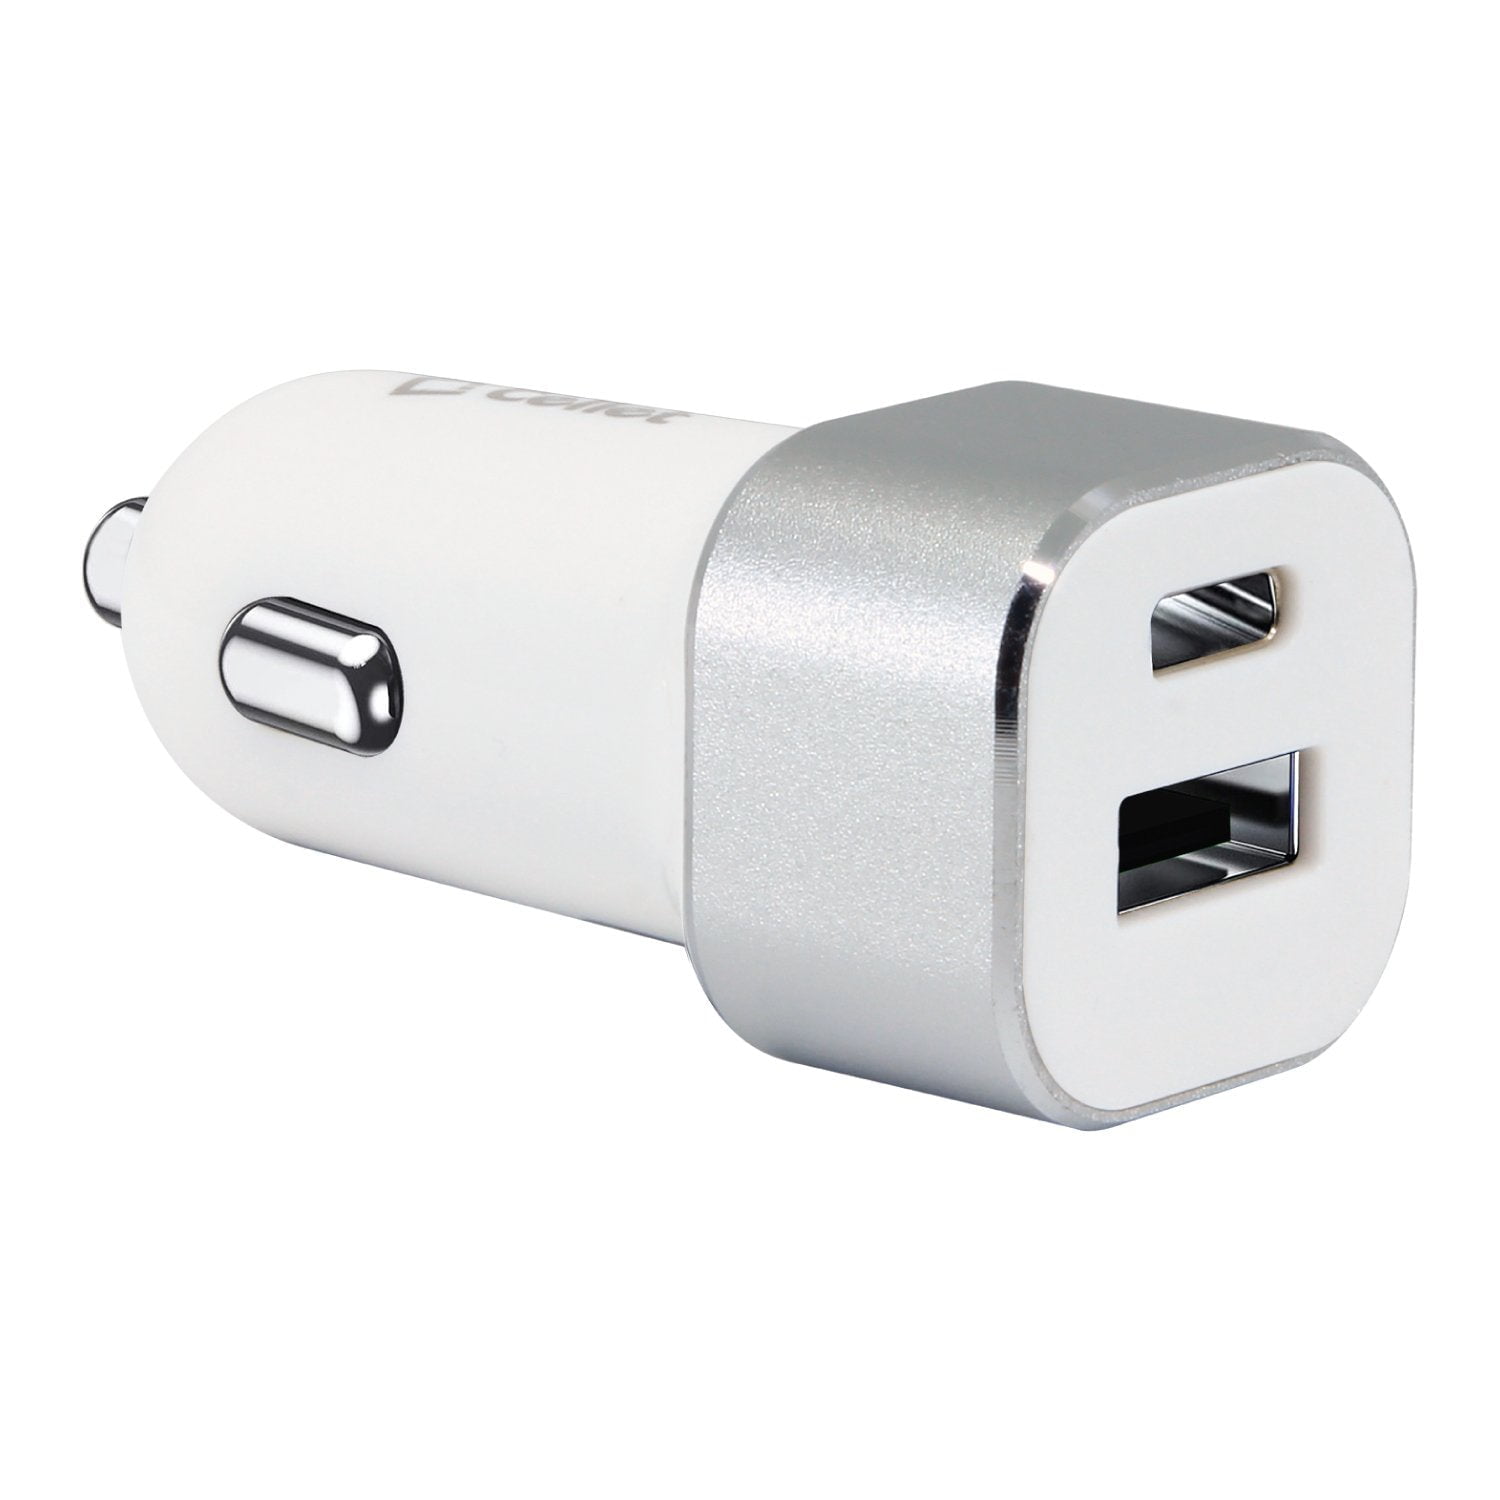 Dual USB Car Charger, Universal High Power 30 Watt Dual (USB A & USB C)  Port Car Charger by Cellet - White